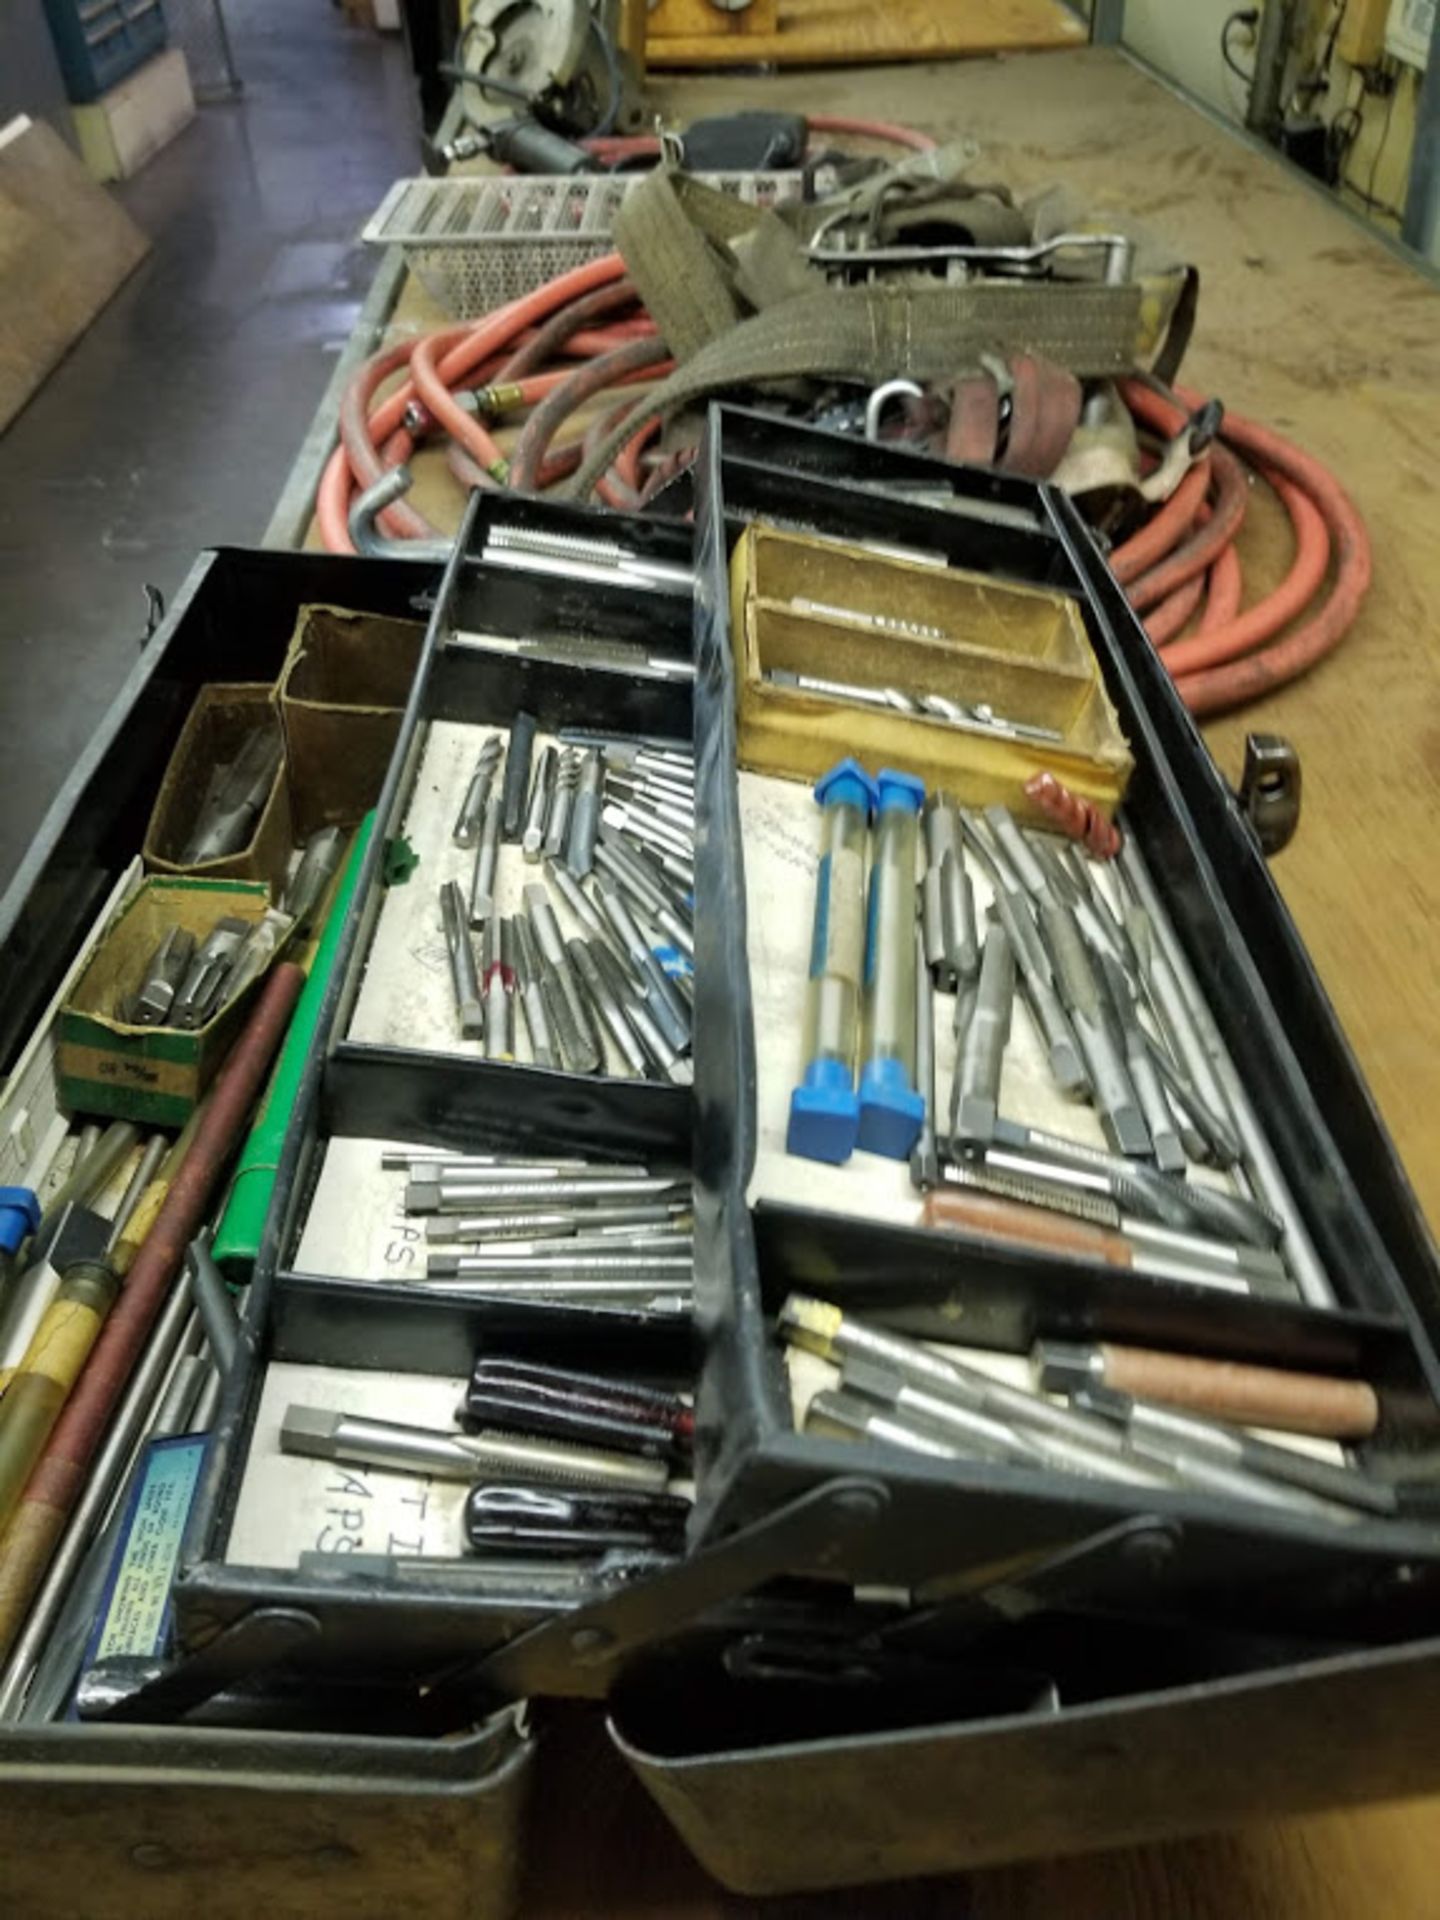 Contents of Shelf, Shil Saw, Grinder, Air Hose, Straps, Taps, & Misc. - Image 3 of 5